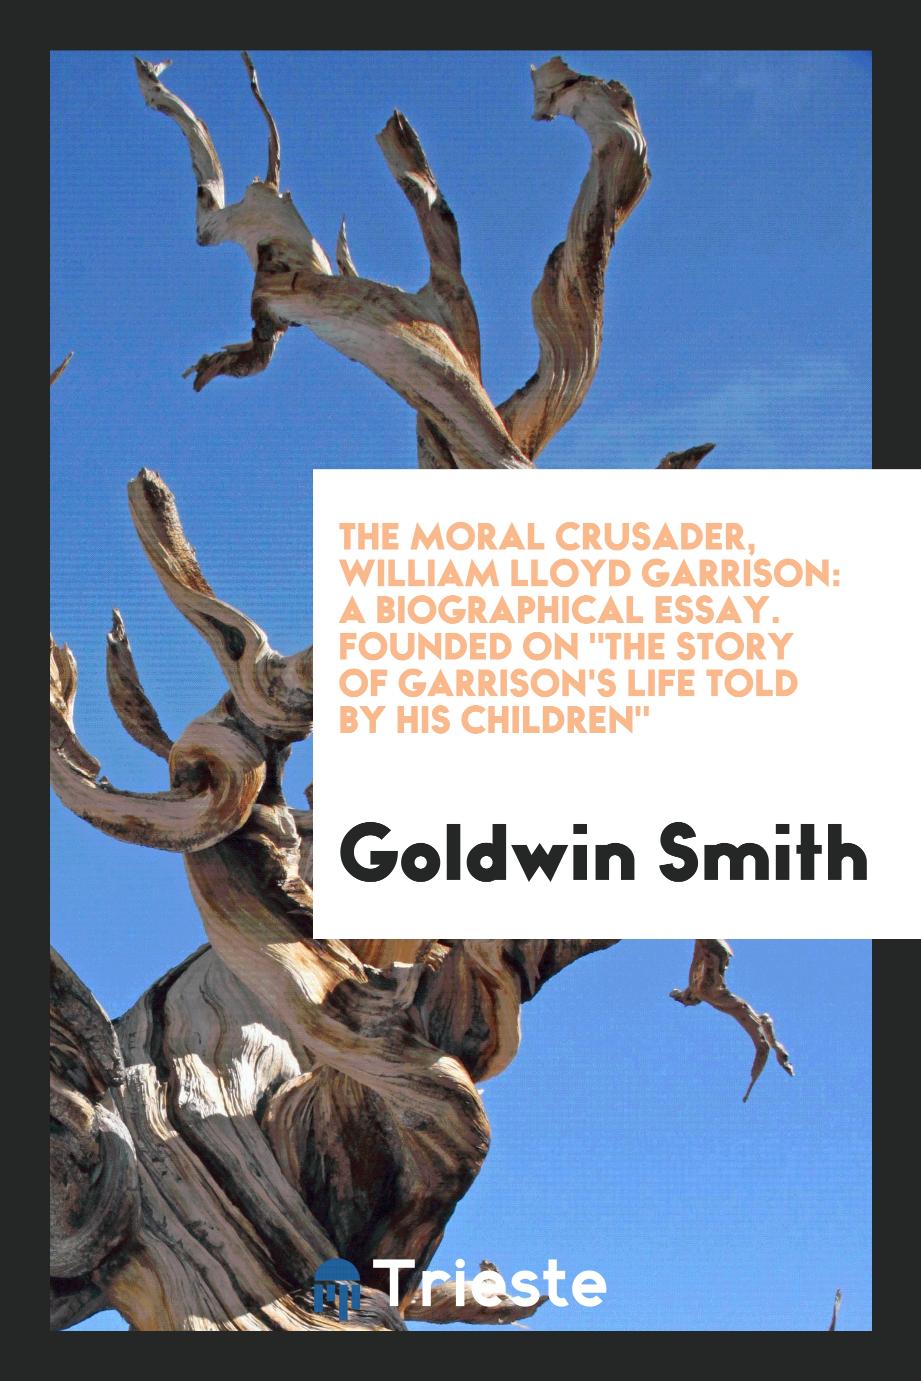 The Moral Crusader, William Lloyd Garrison: A Biographical Essay. Founded on "The Story of Garrison's Life Told by His Children"